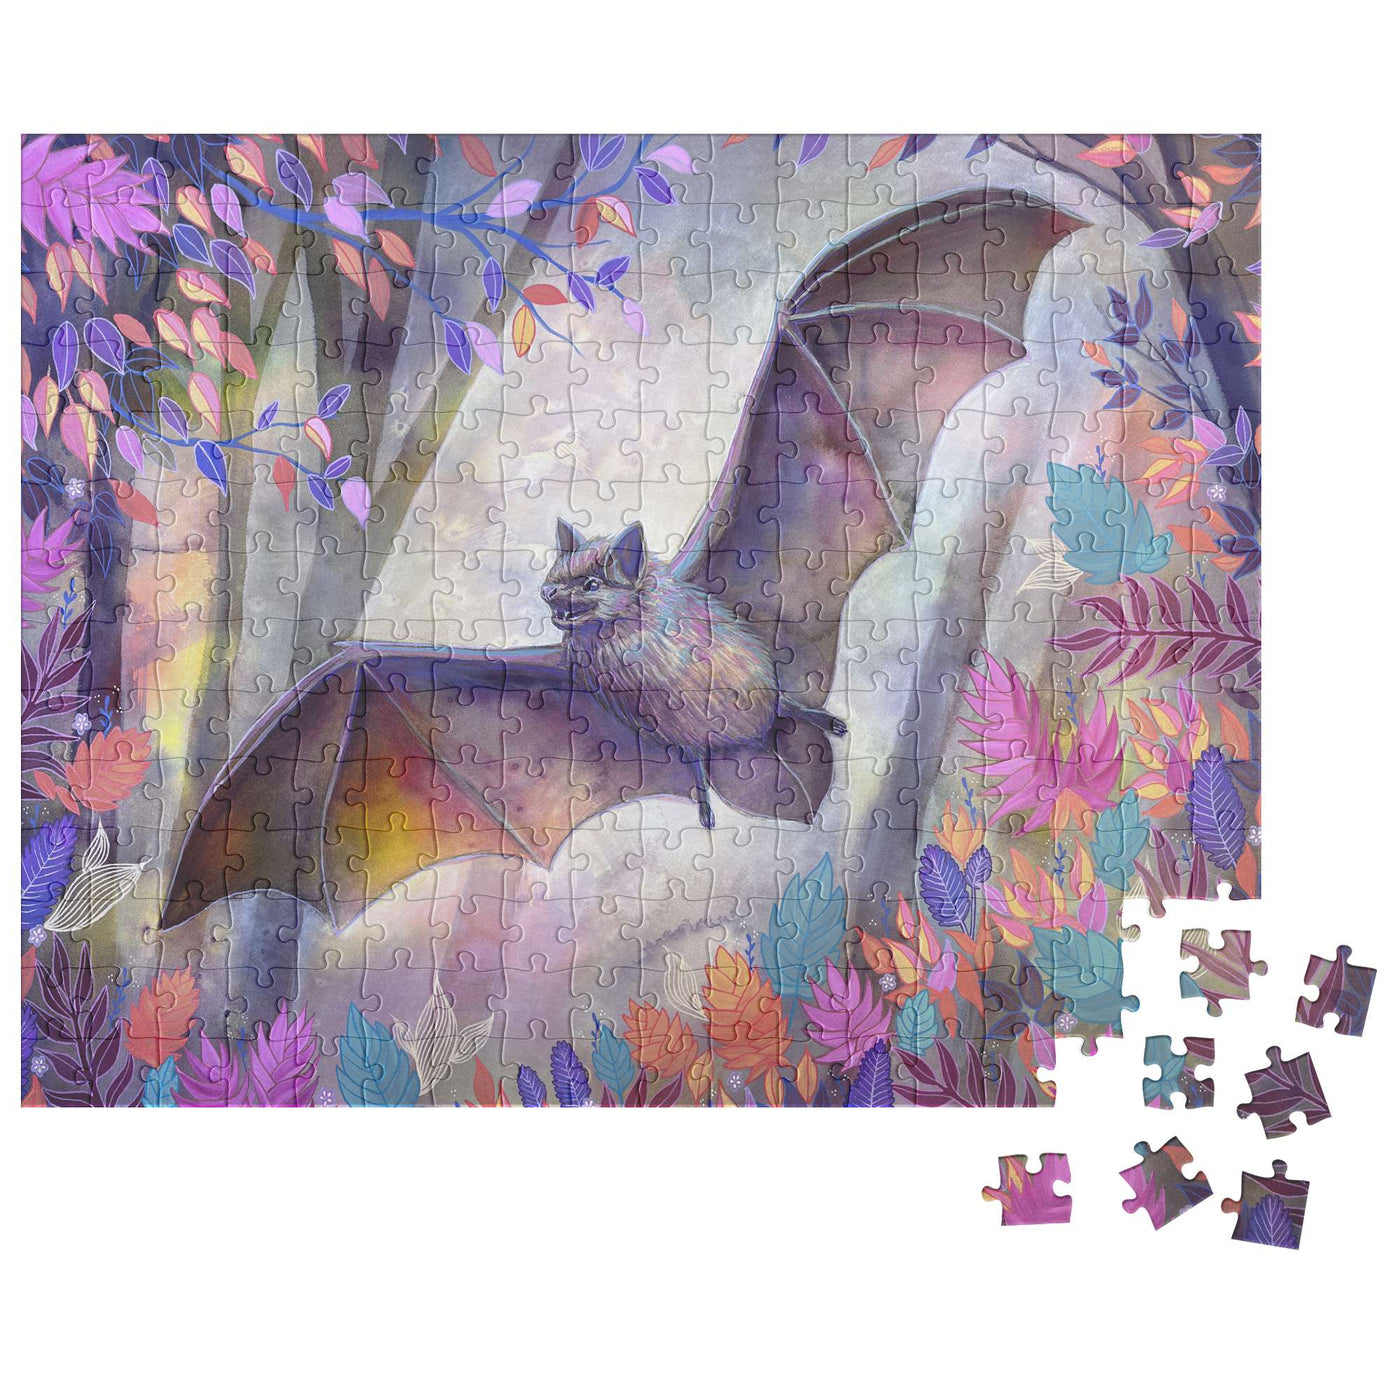 Bat Puzzle depicting a whimsical bat with floral and colorful background, partially assembled with loose pieces nearby.